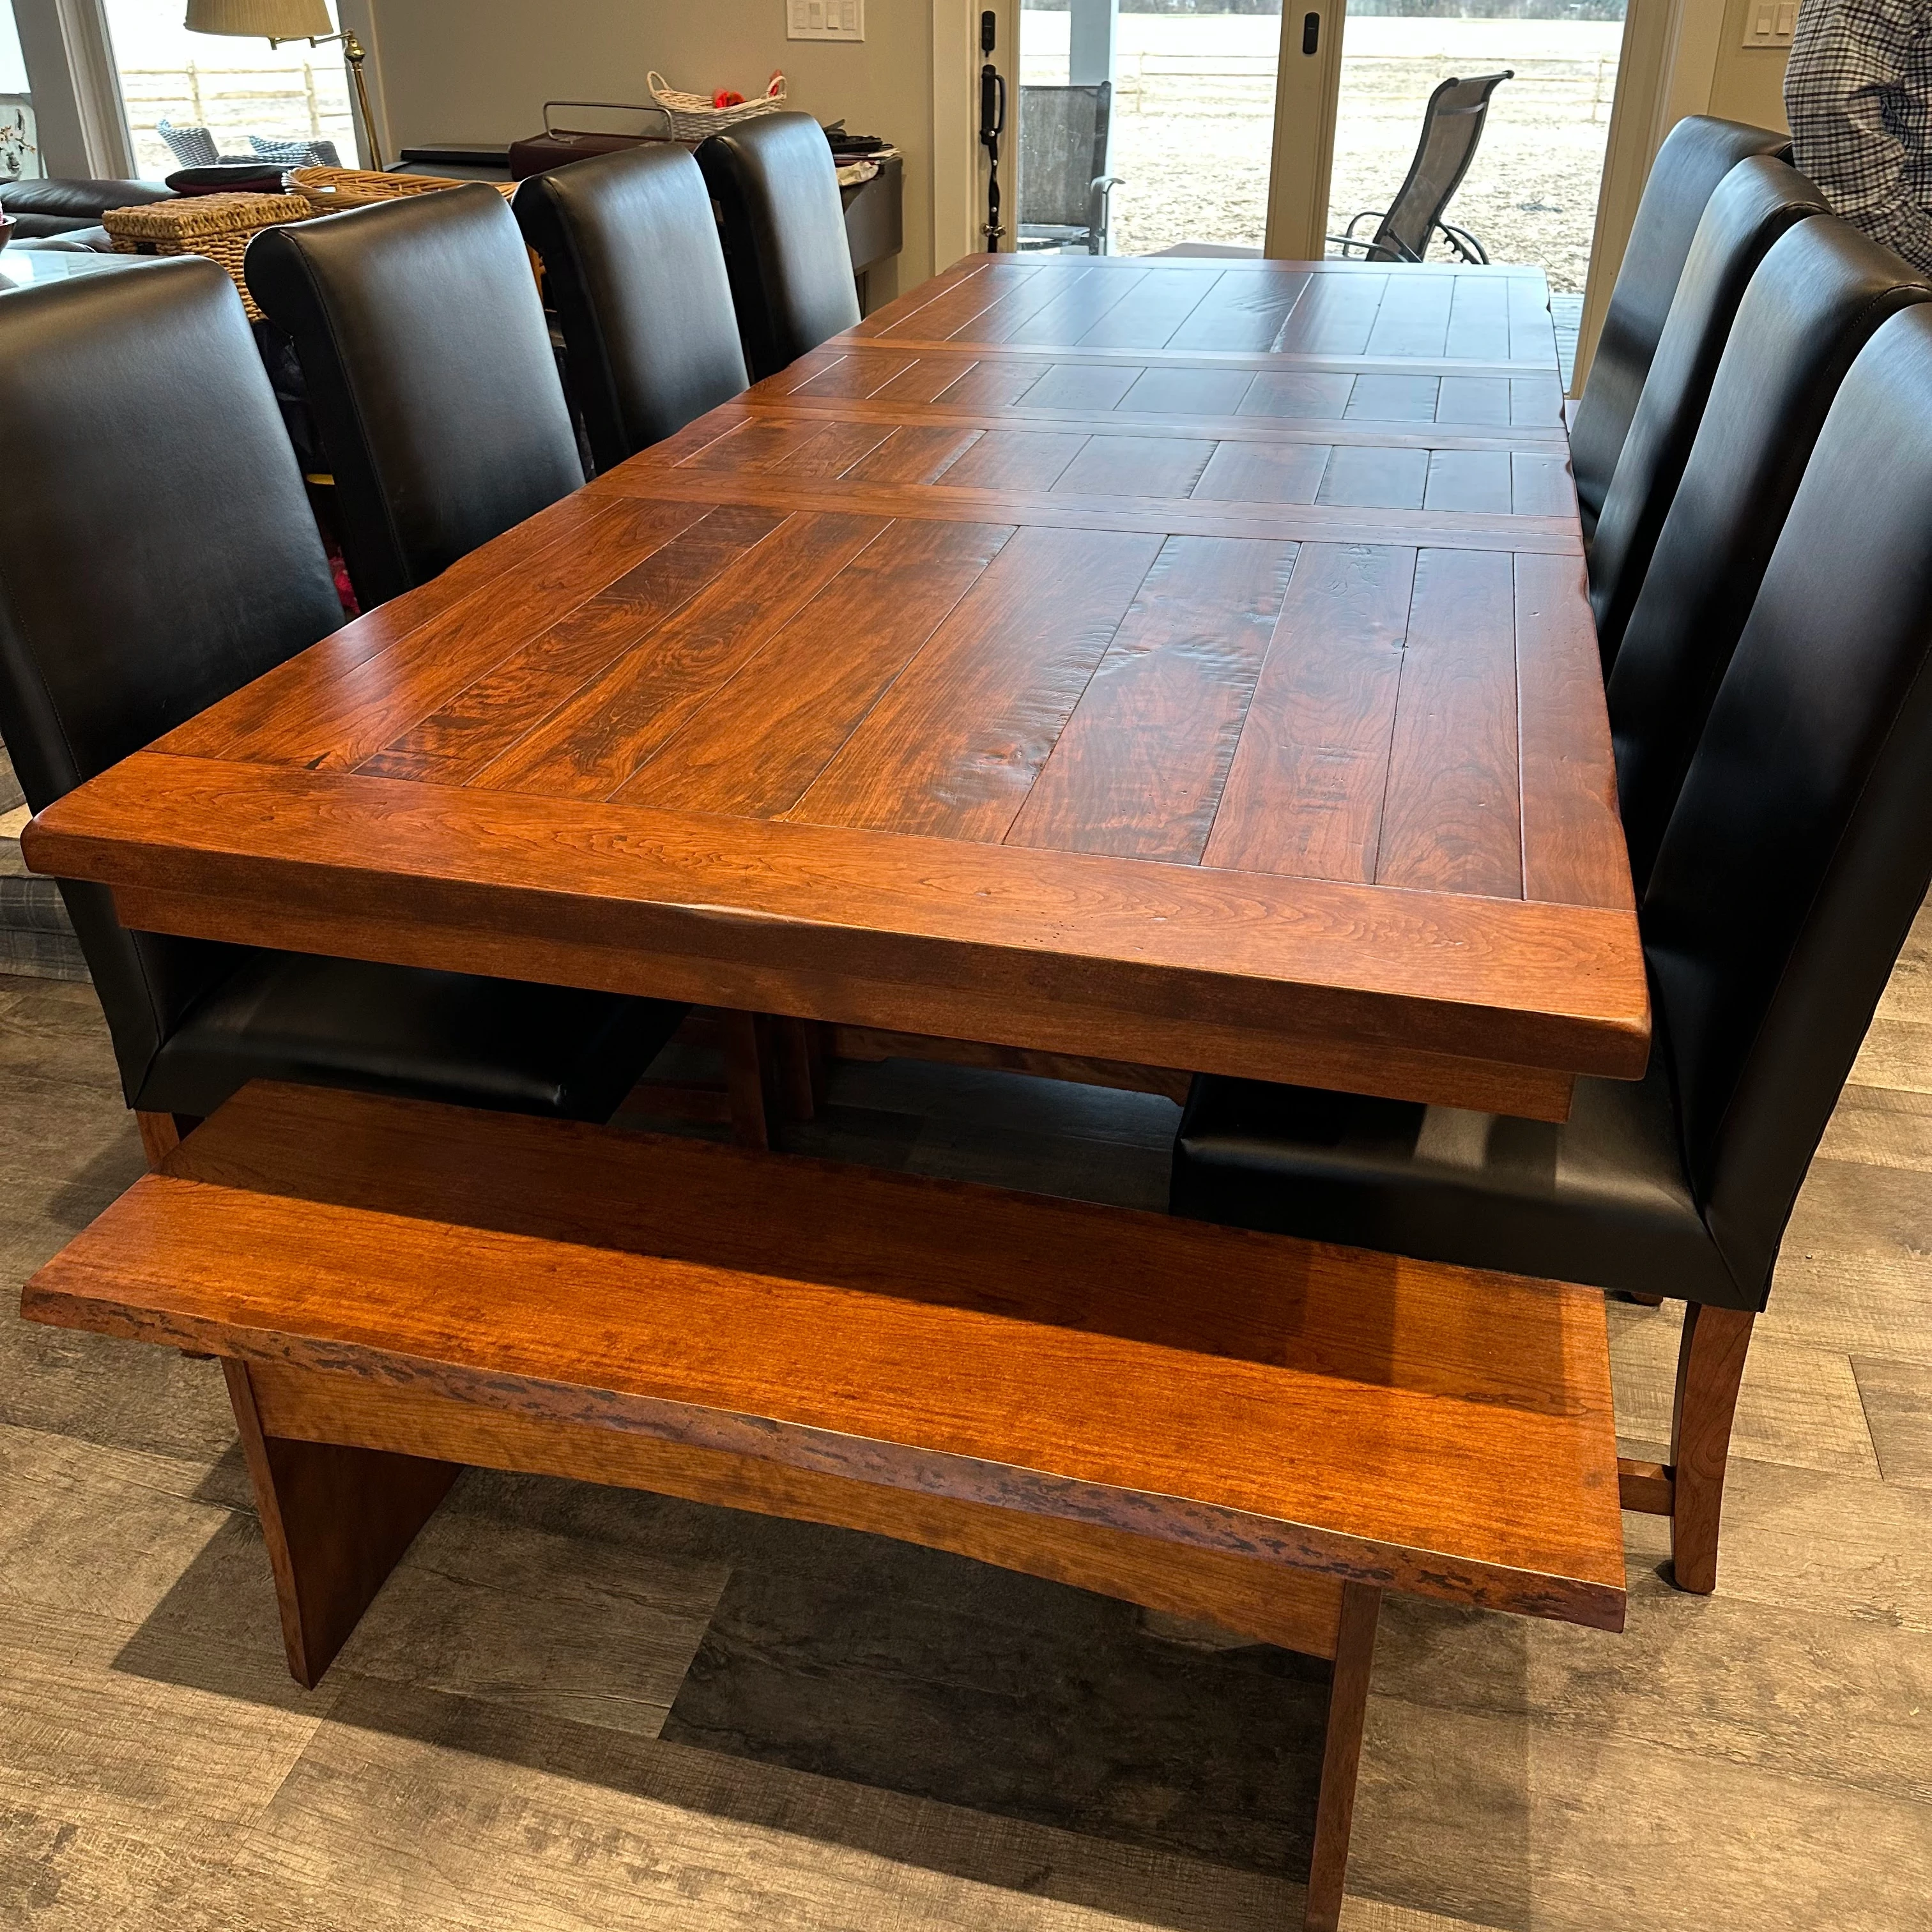 Holbrooke Dining Table, Parsons Chairs, Rustic Cherry Bench